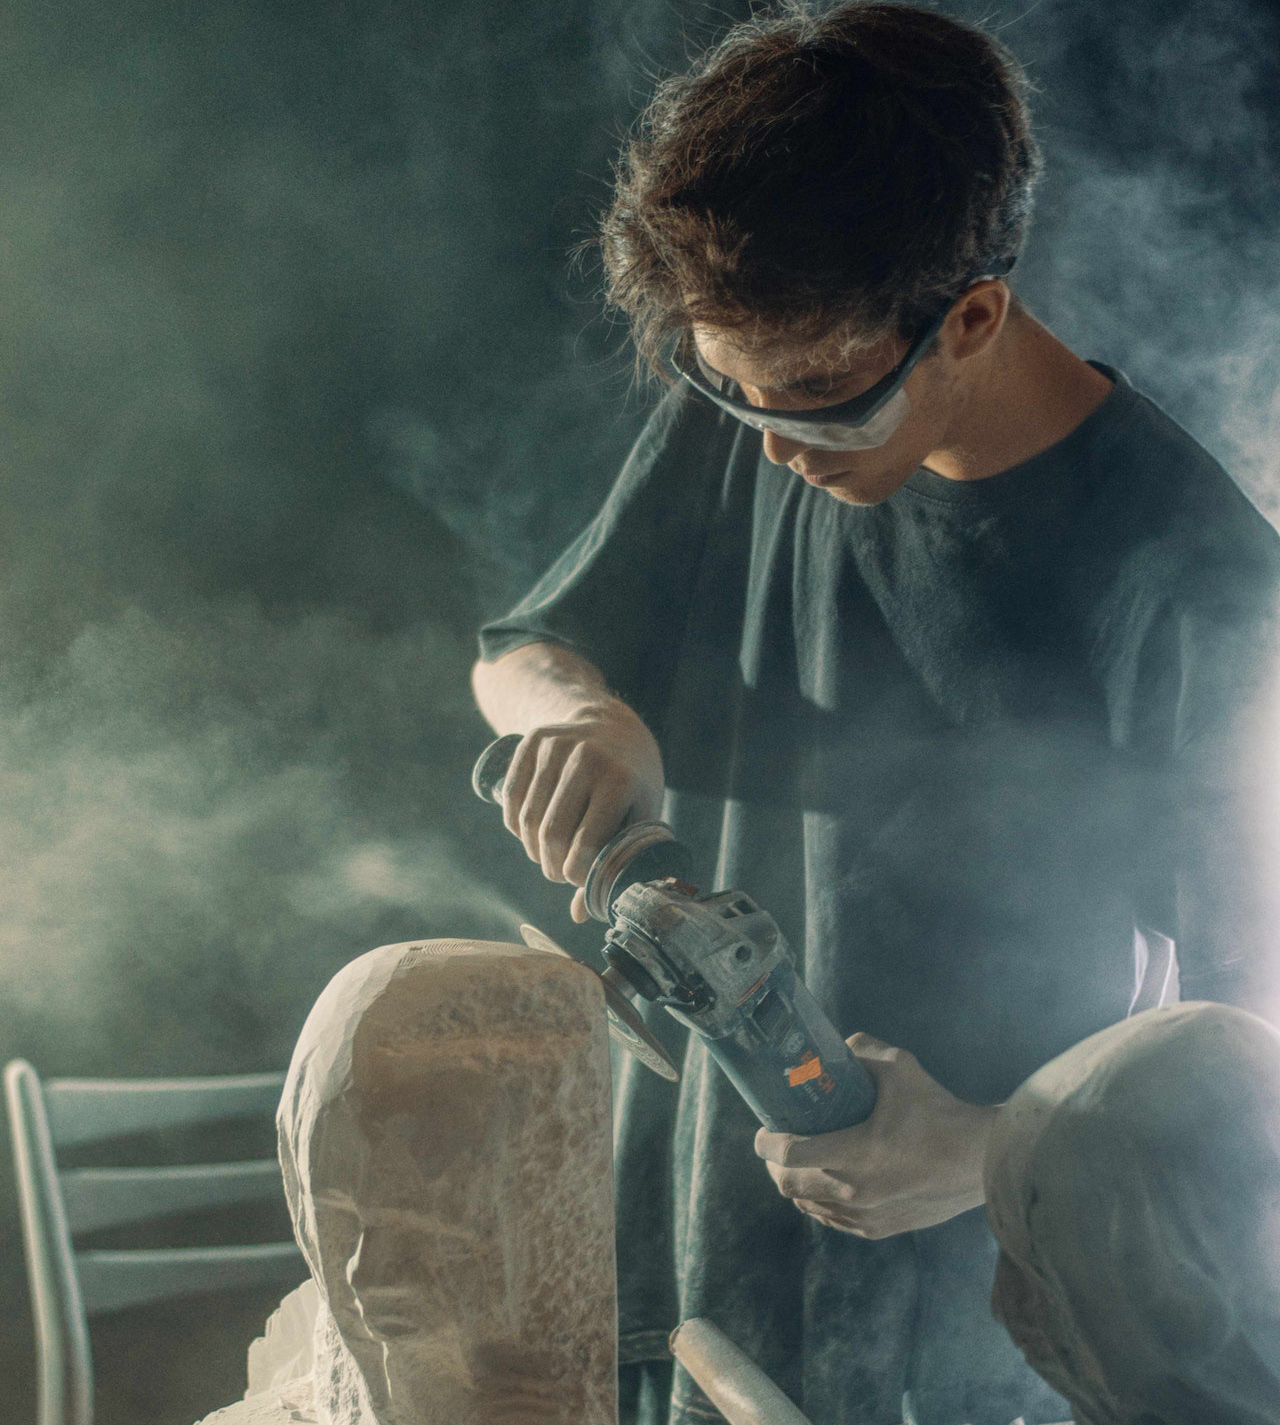 Guy sanding a clay statue